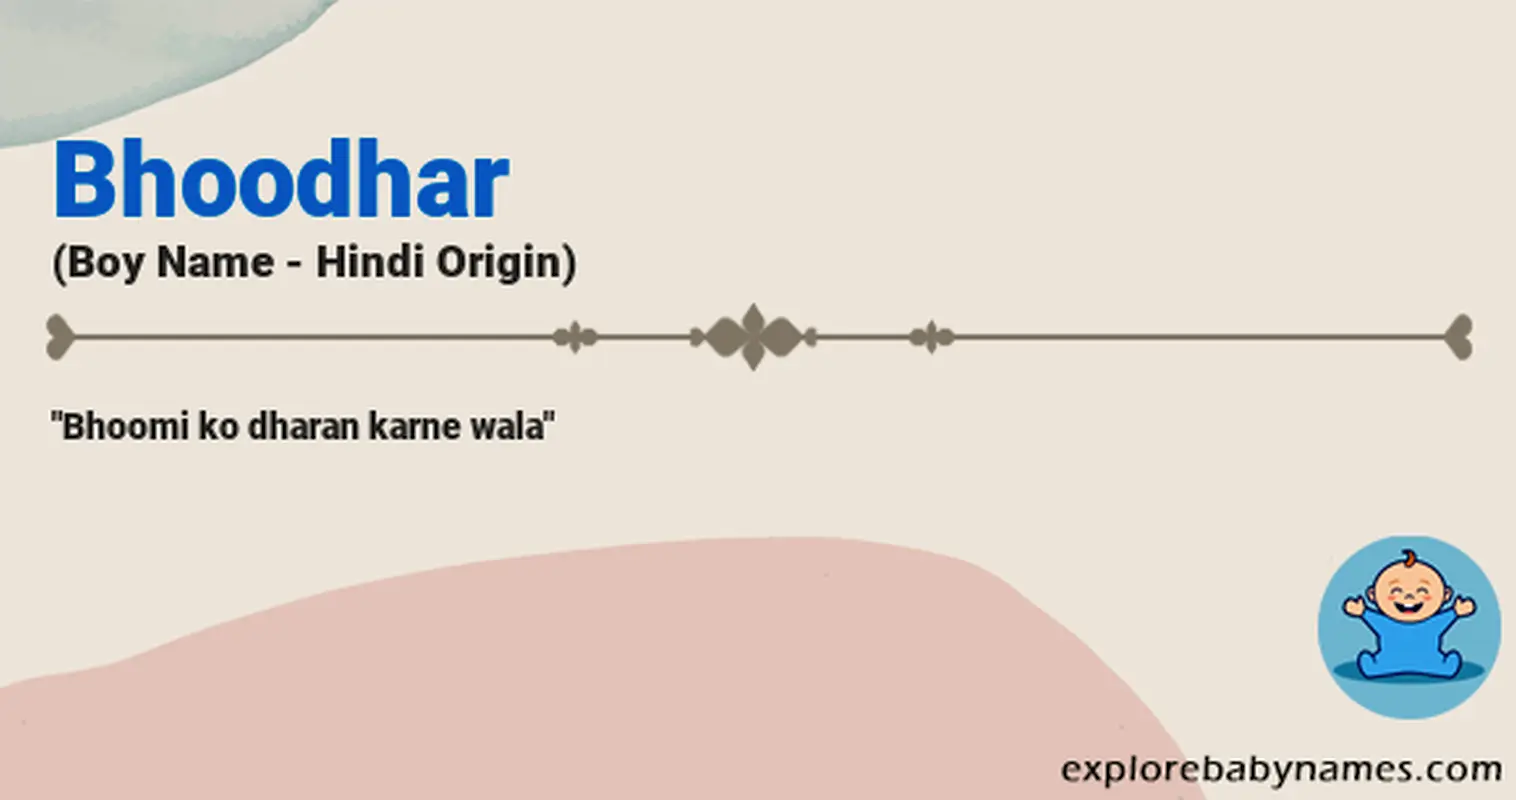 Meaning of Bhoodhar